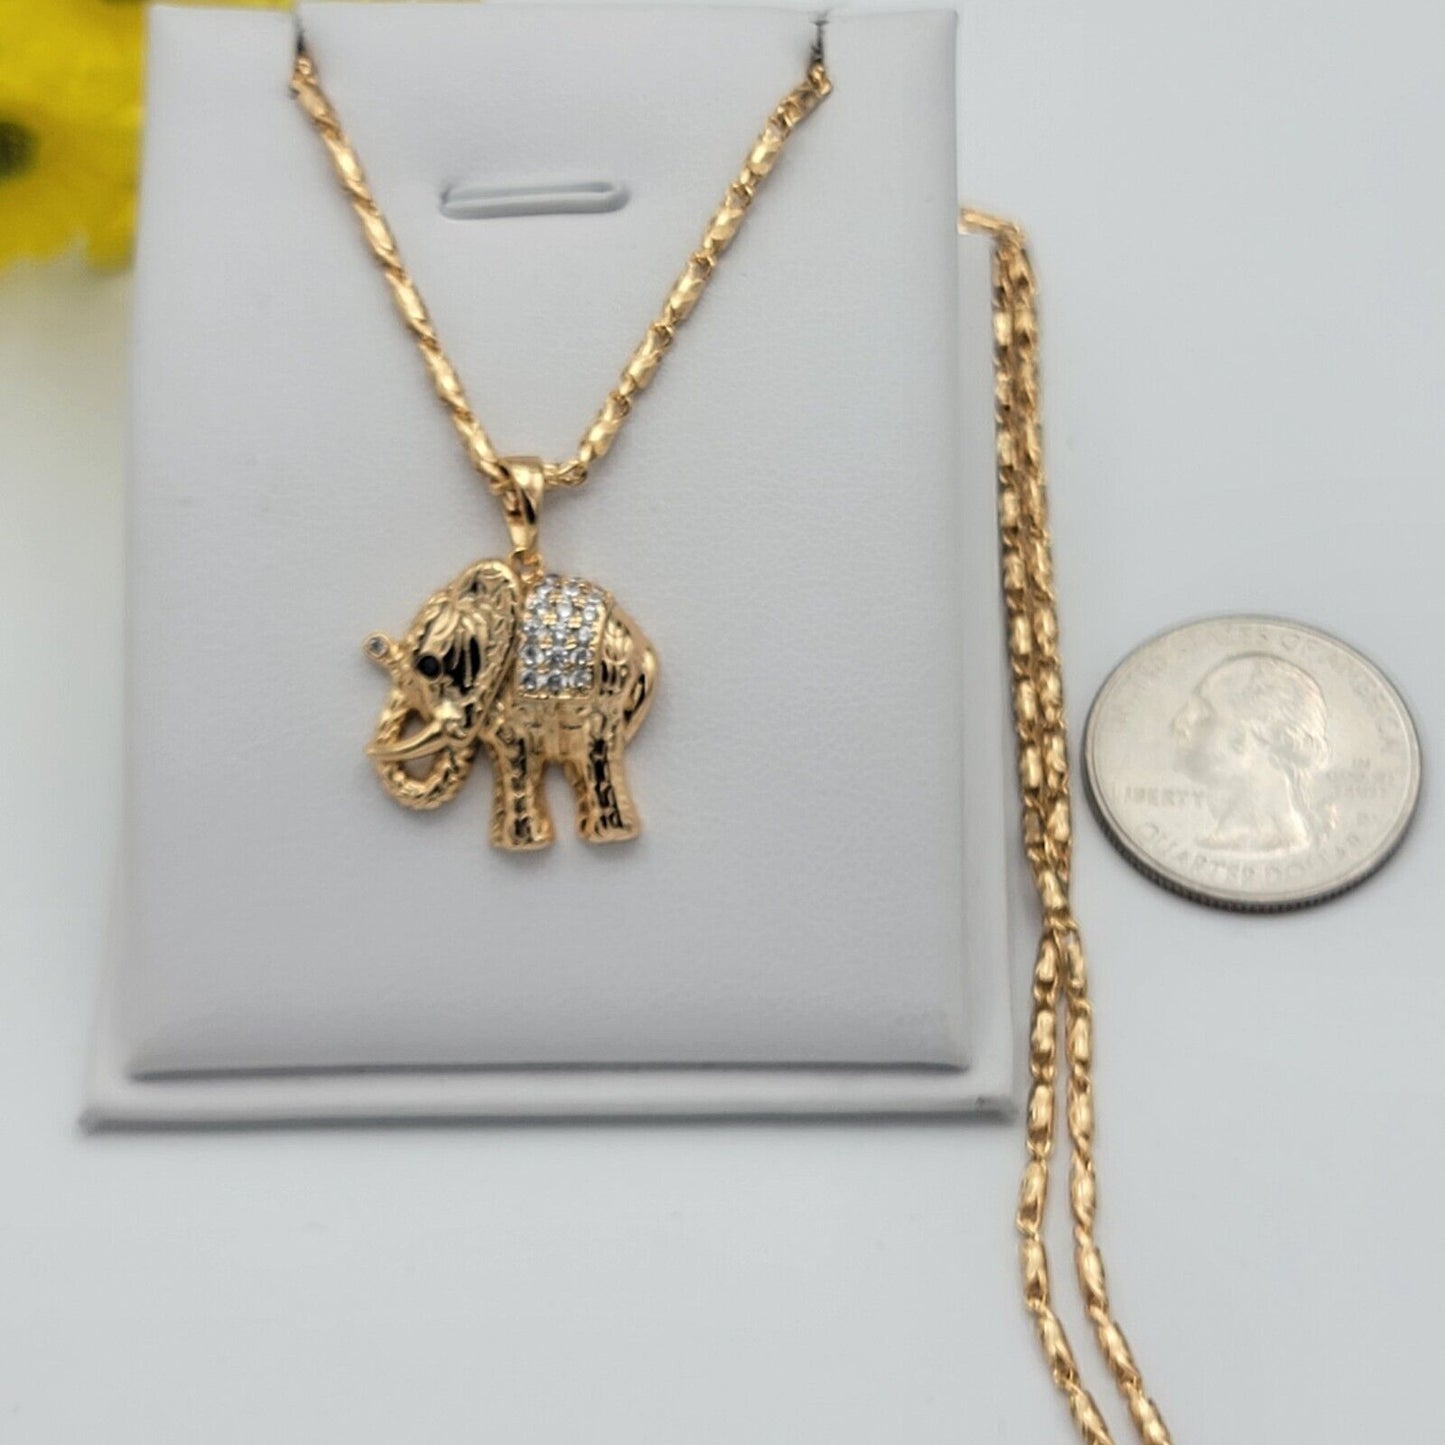 Necklaces - 18K Gold Plated. Elephant Pendant & Chain.